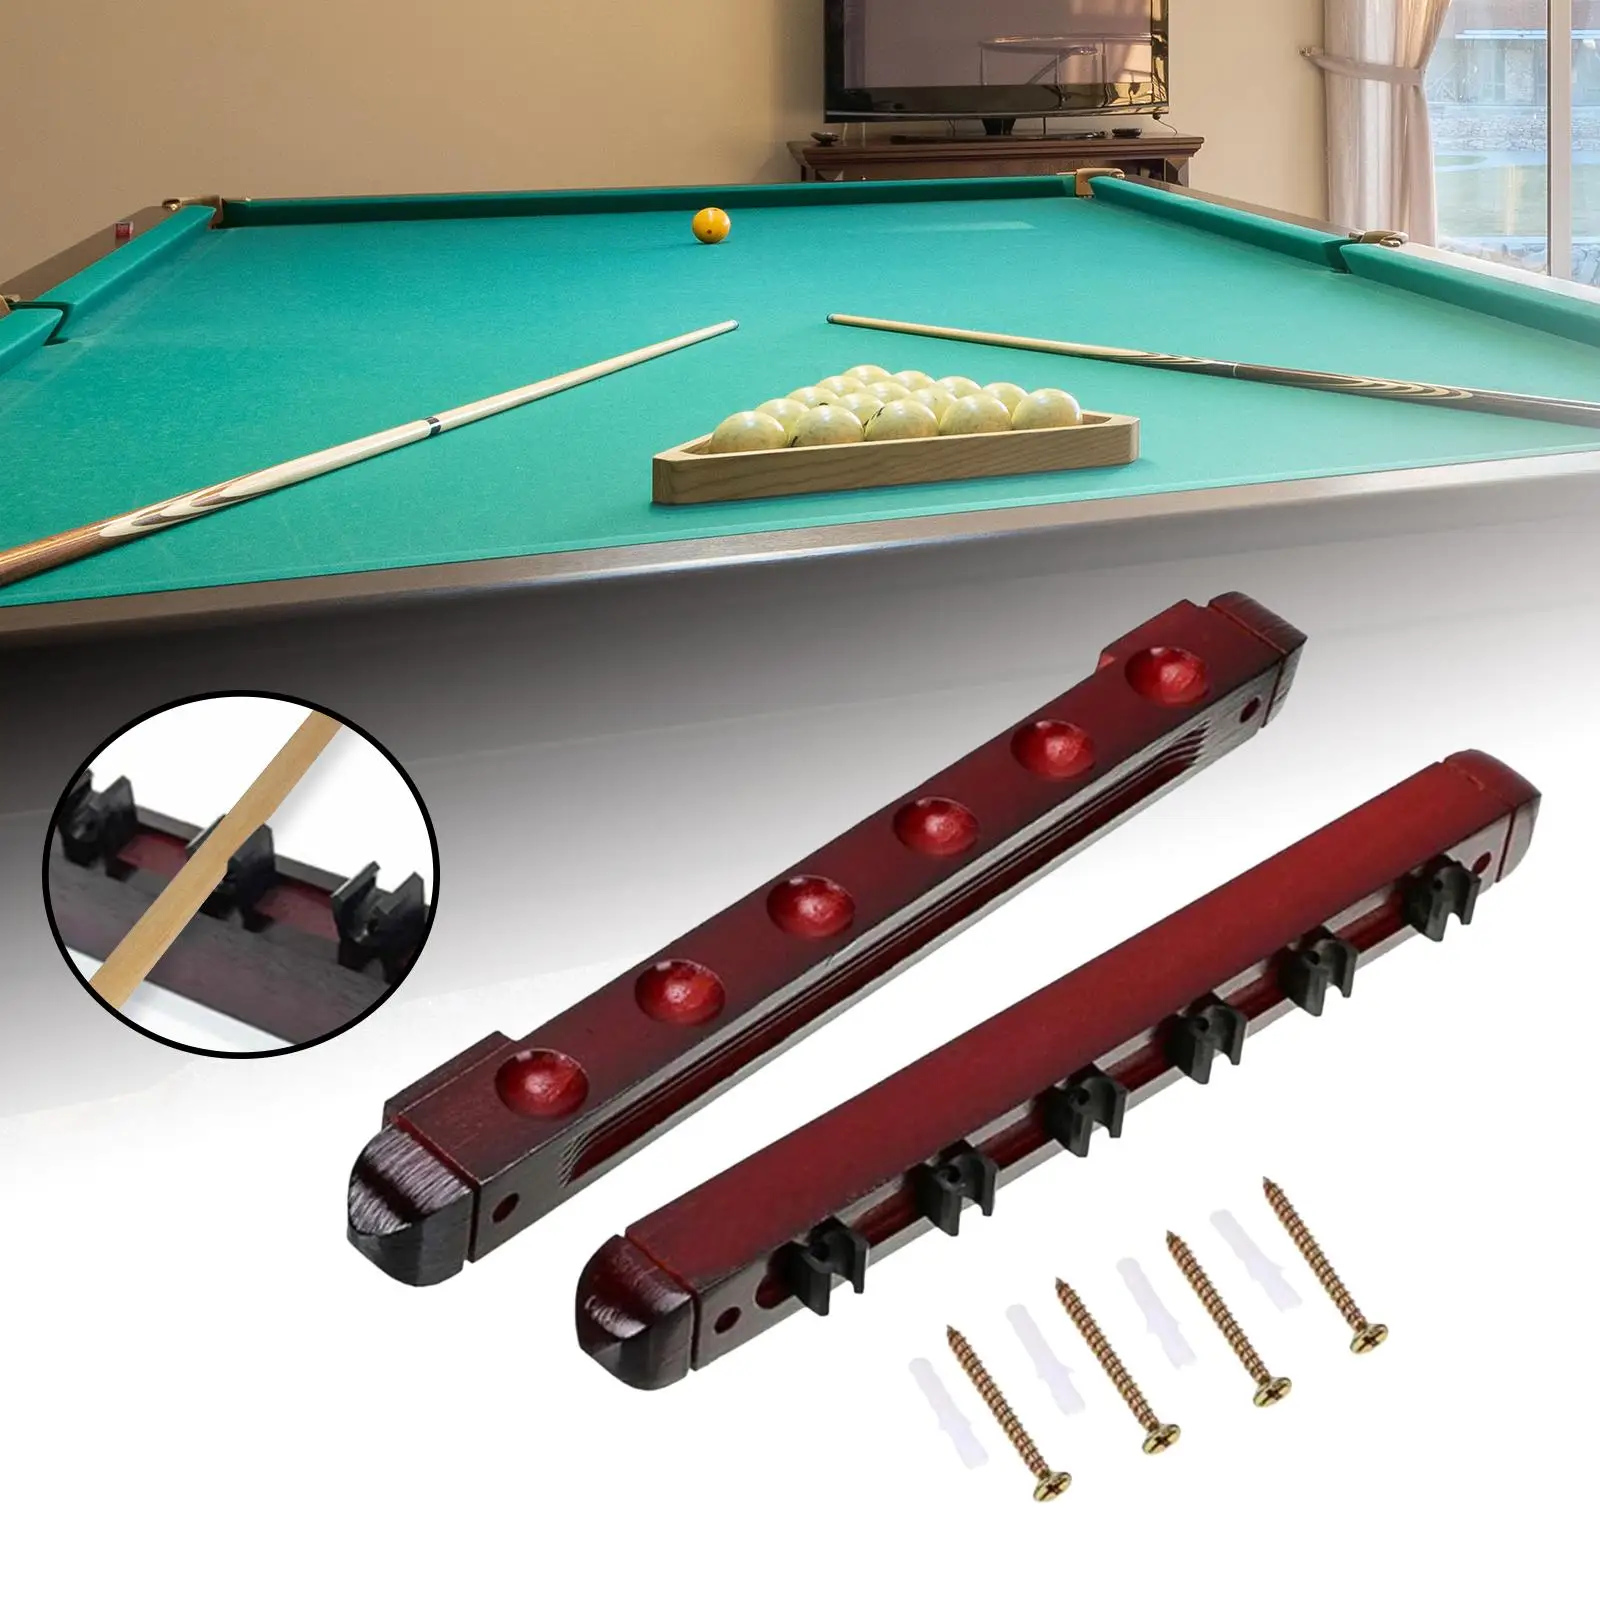 Billiard Pool Cue Stick Rack, Wooden 6 Pool Stick Holder  Mounted Organizer Suitable for Pool Bars, Clubs and Billiard Players